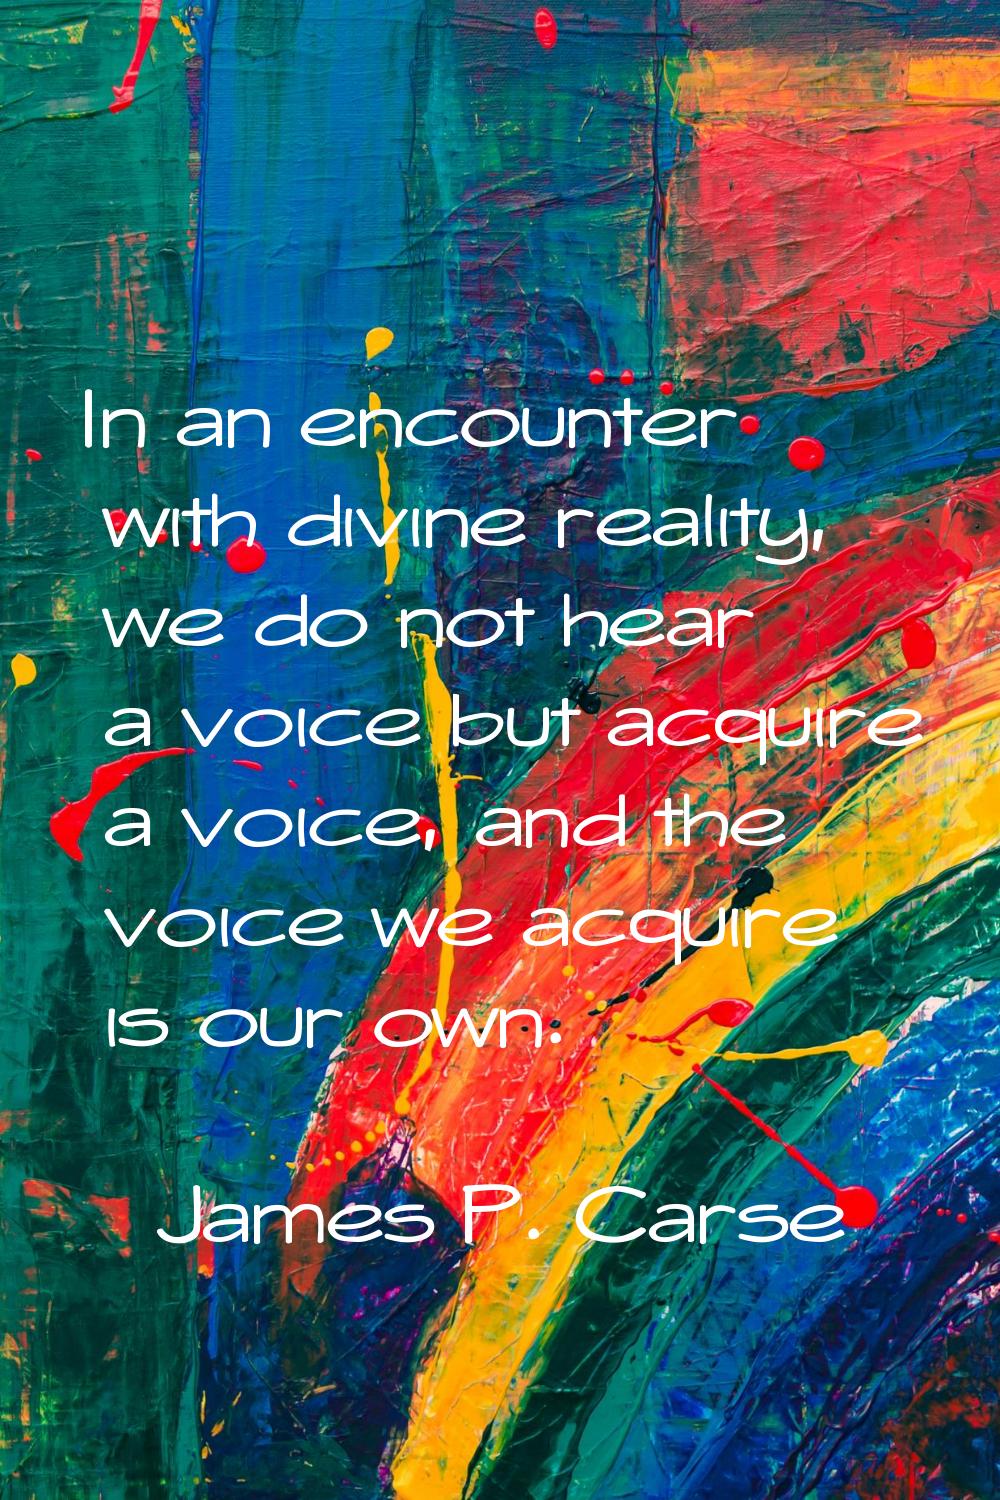 In an encounter with divine reality, we do not hear a voice but acquire a voice, and the voice we a